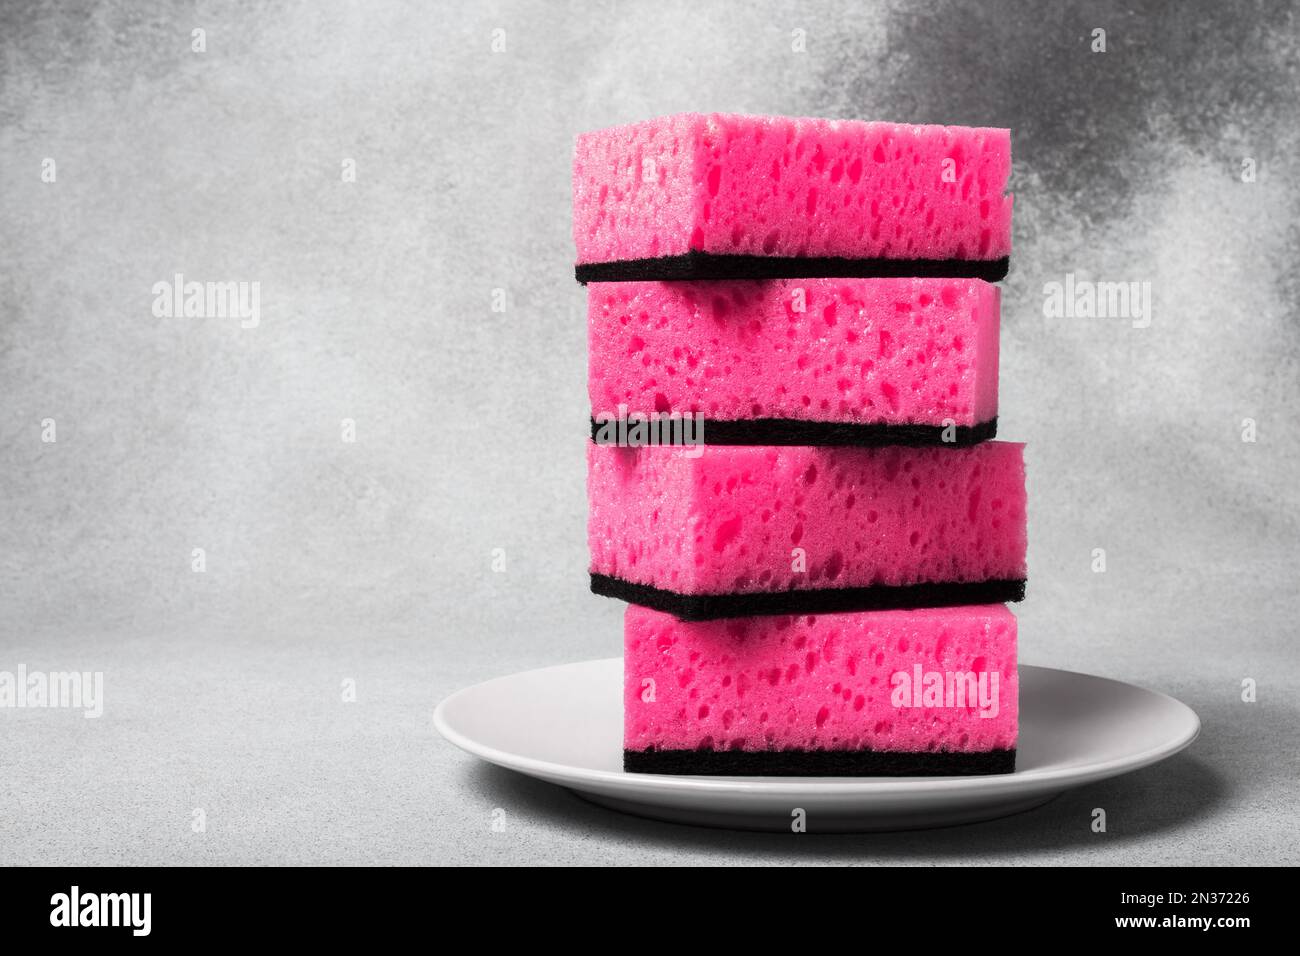 https://c8.alamy.com/comp/2N37226/a-stack-of-barbie-pink-dishwashing-sponges-on-a-white-plate-close-up-on-a-neutral-gray-background-gentle-dishwashing-house-cleaning-2N37226.jpg